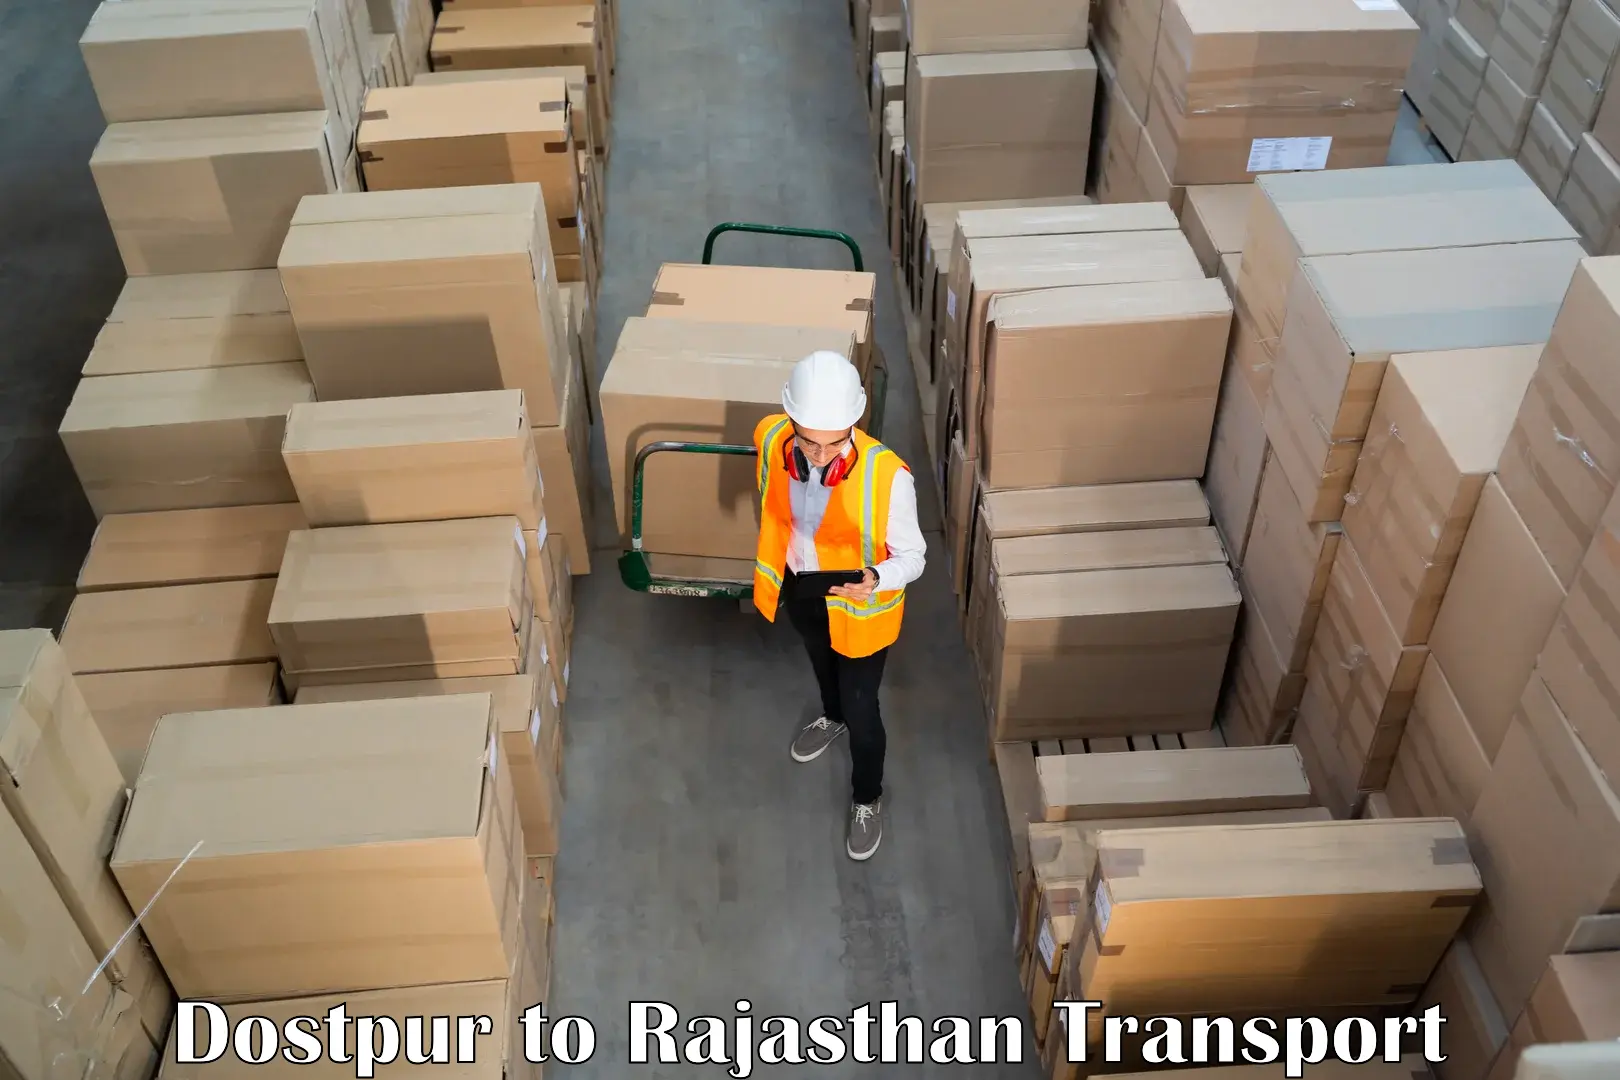 Transport shared services Dostpur to Rajasthan